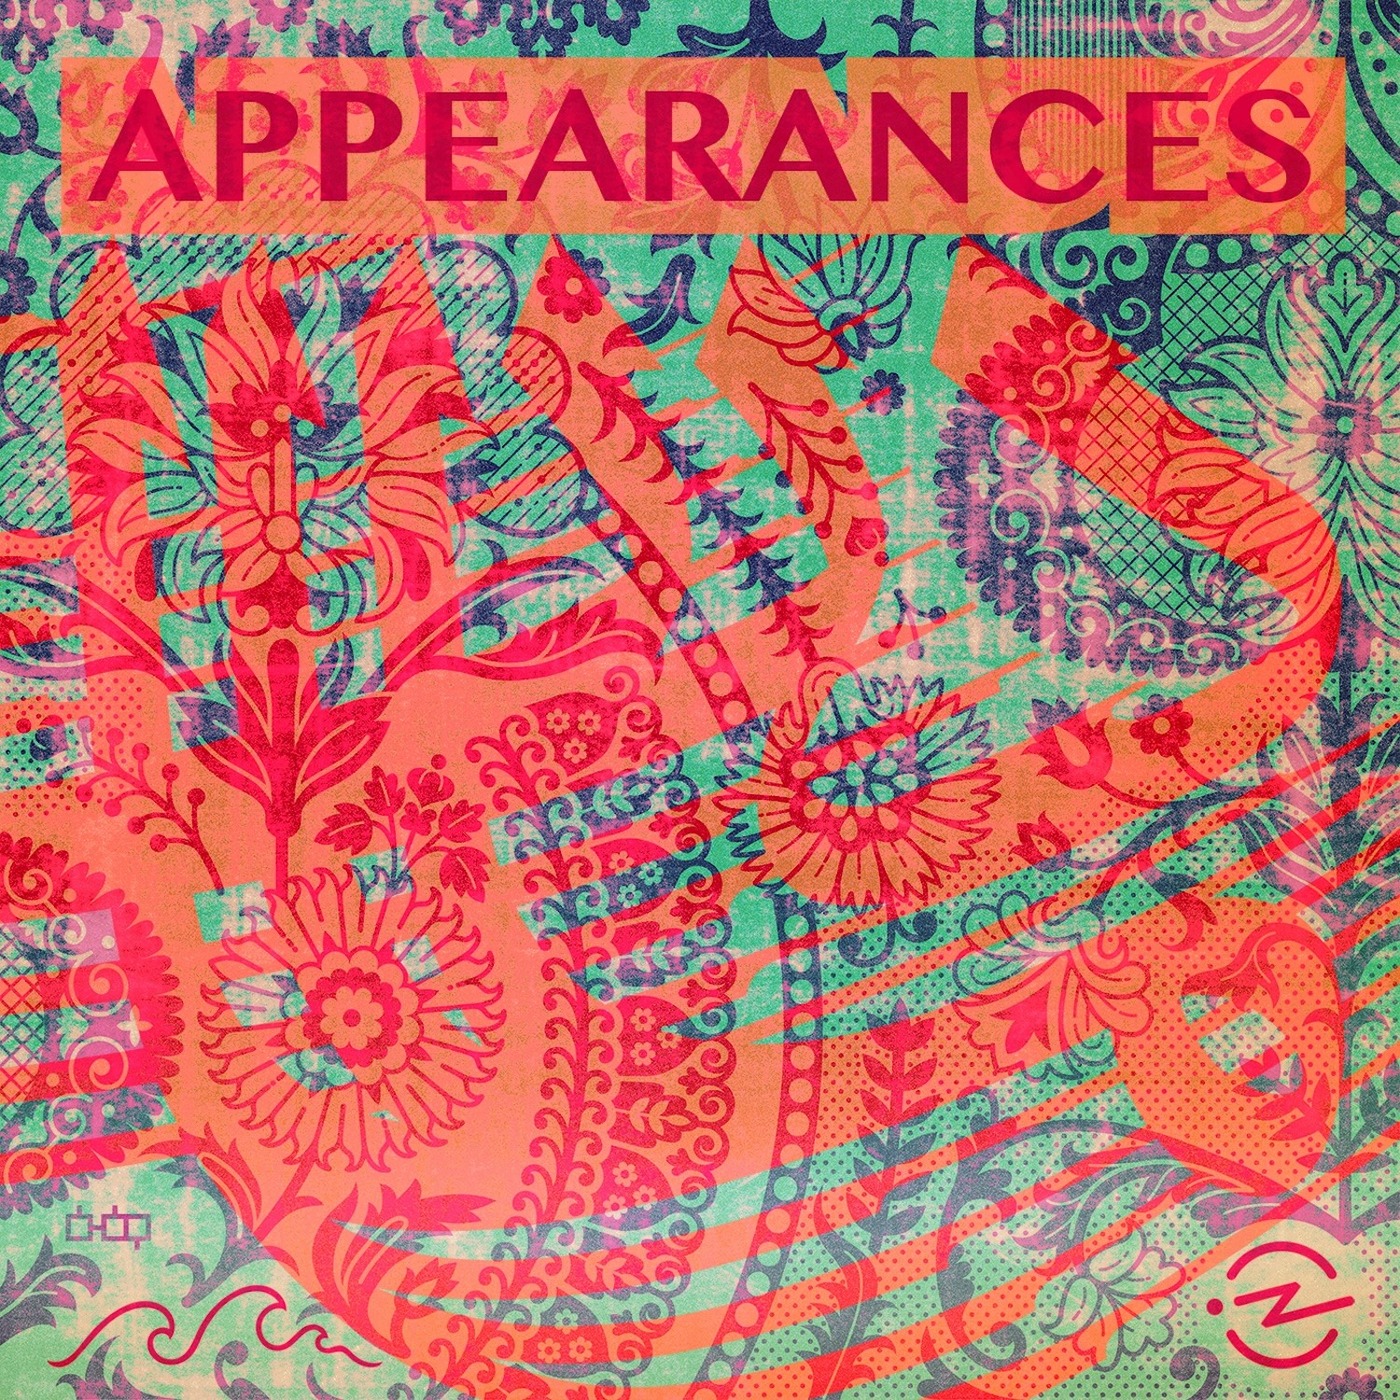 Listen to Appearances